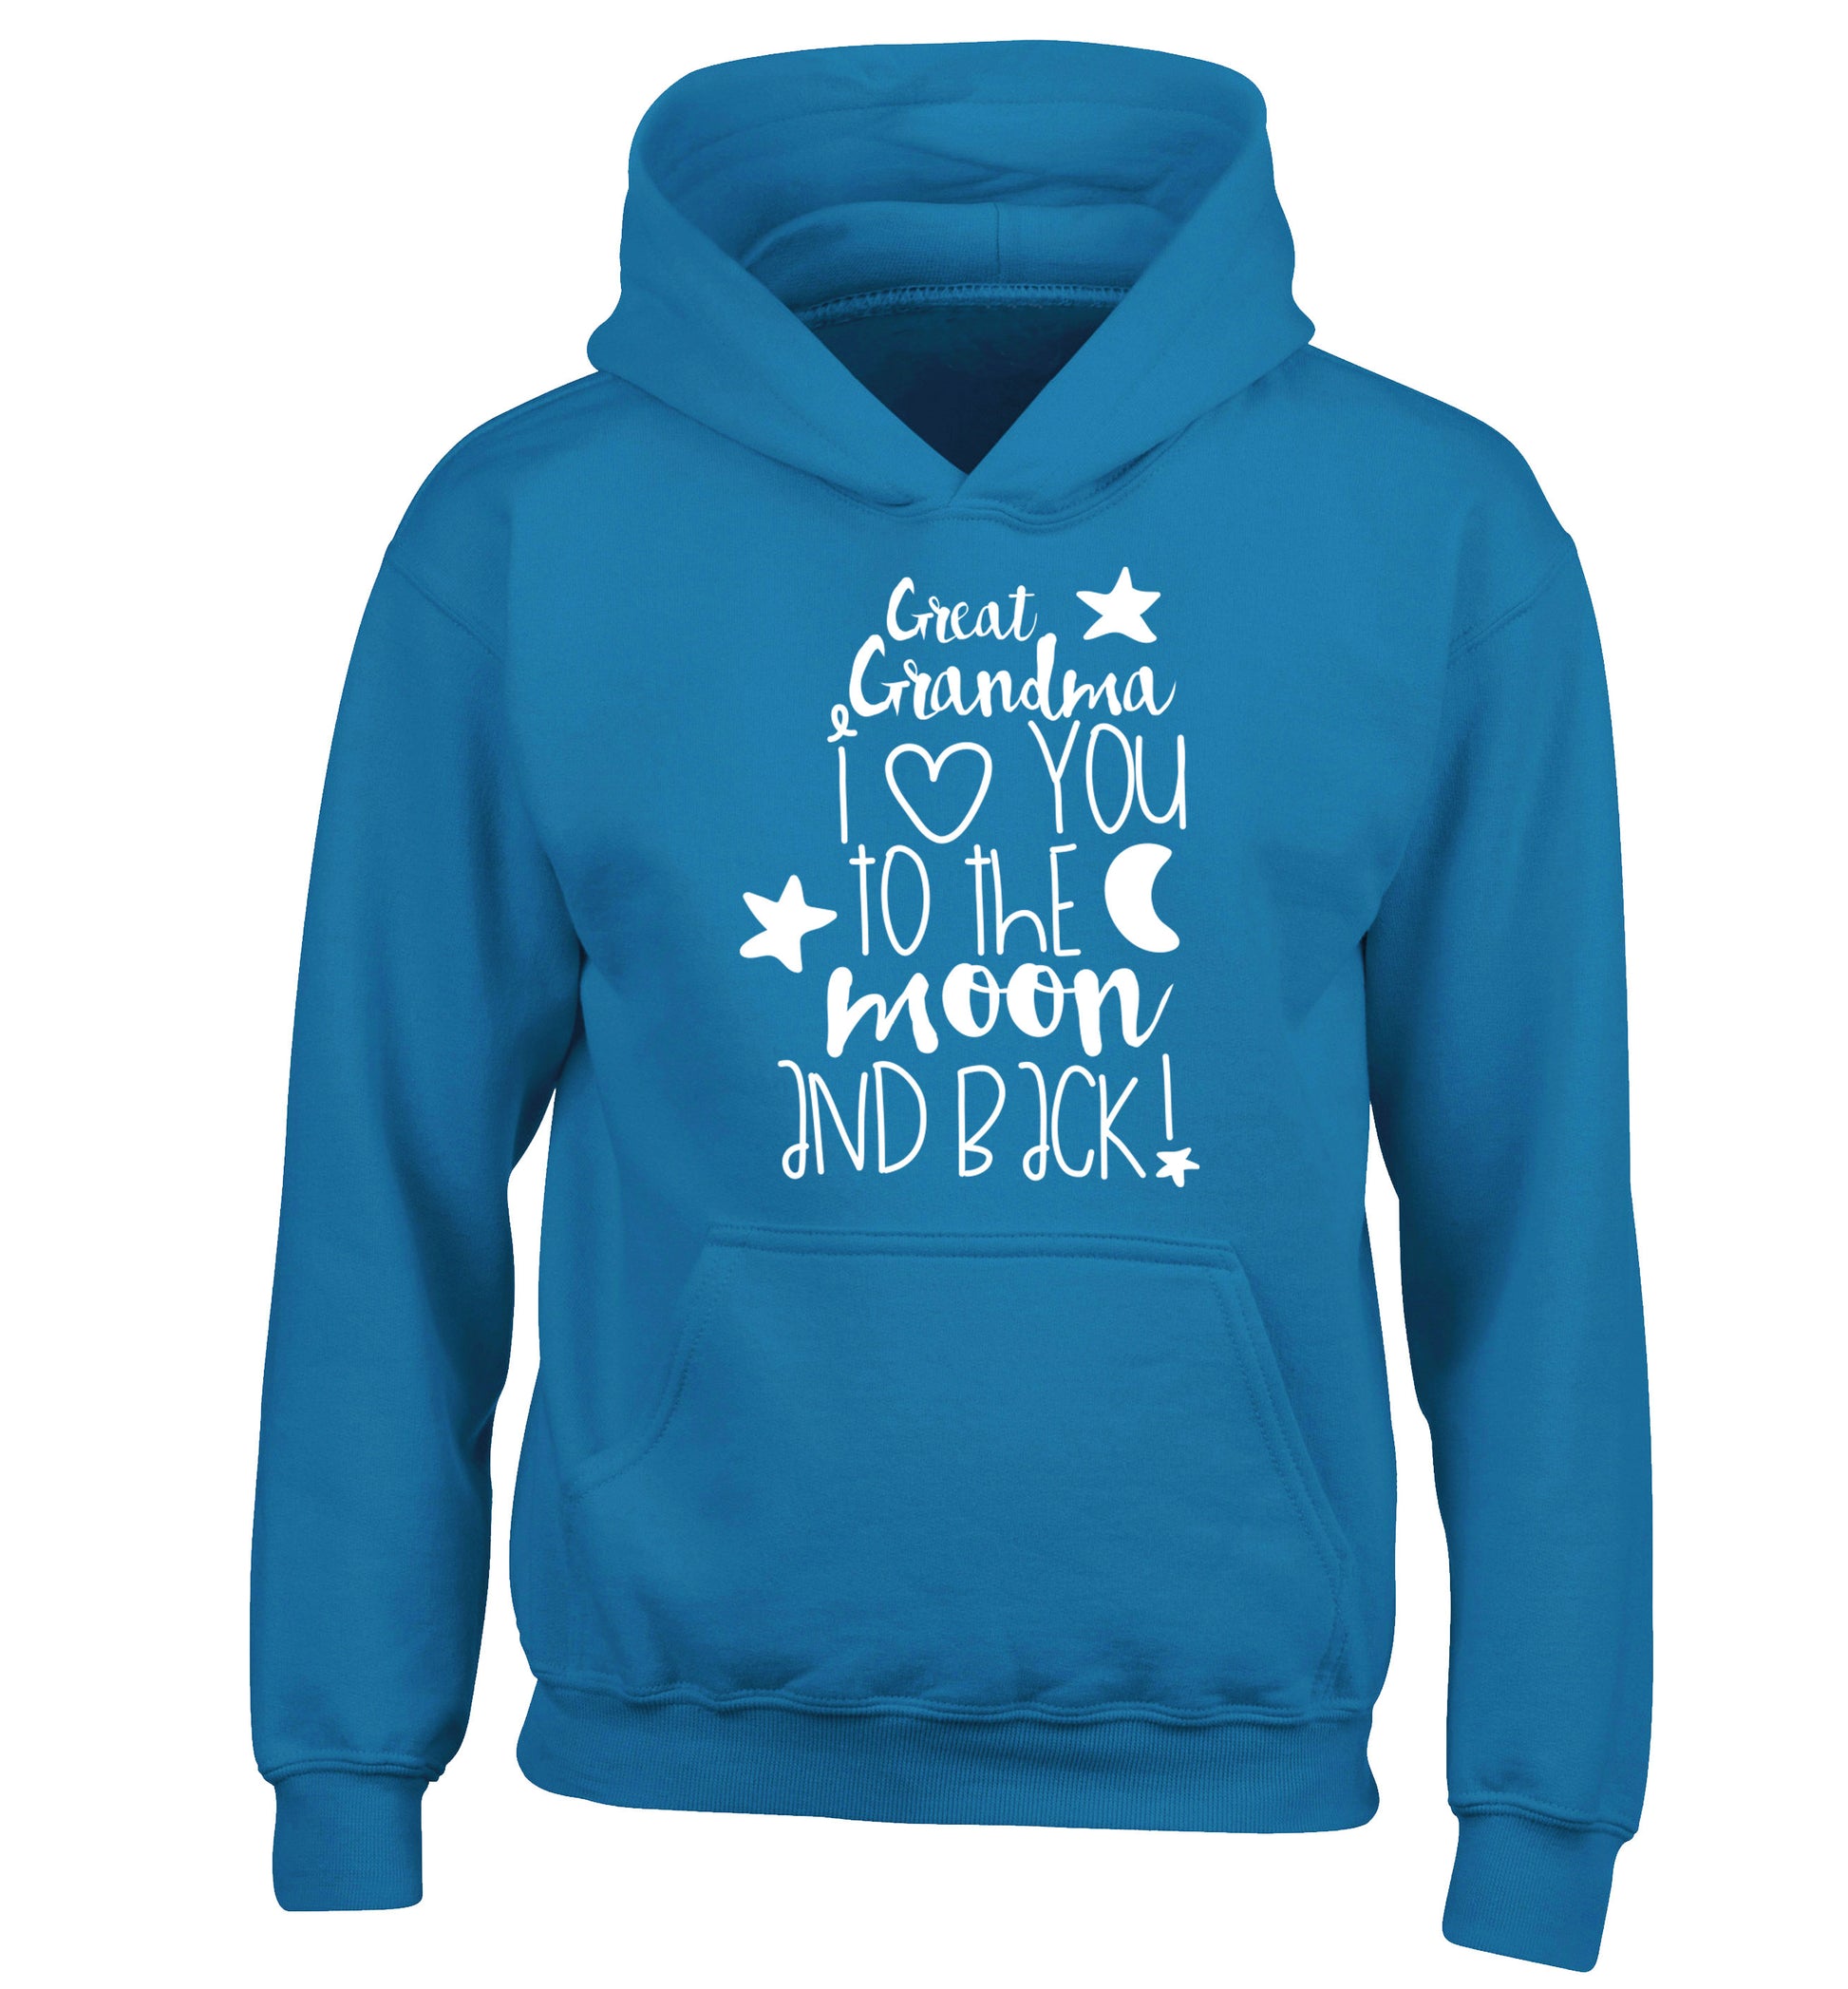 Great Grandma I love you to the moon and back children's blue hoodie 12-14 Years